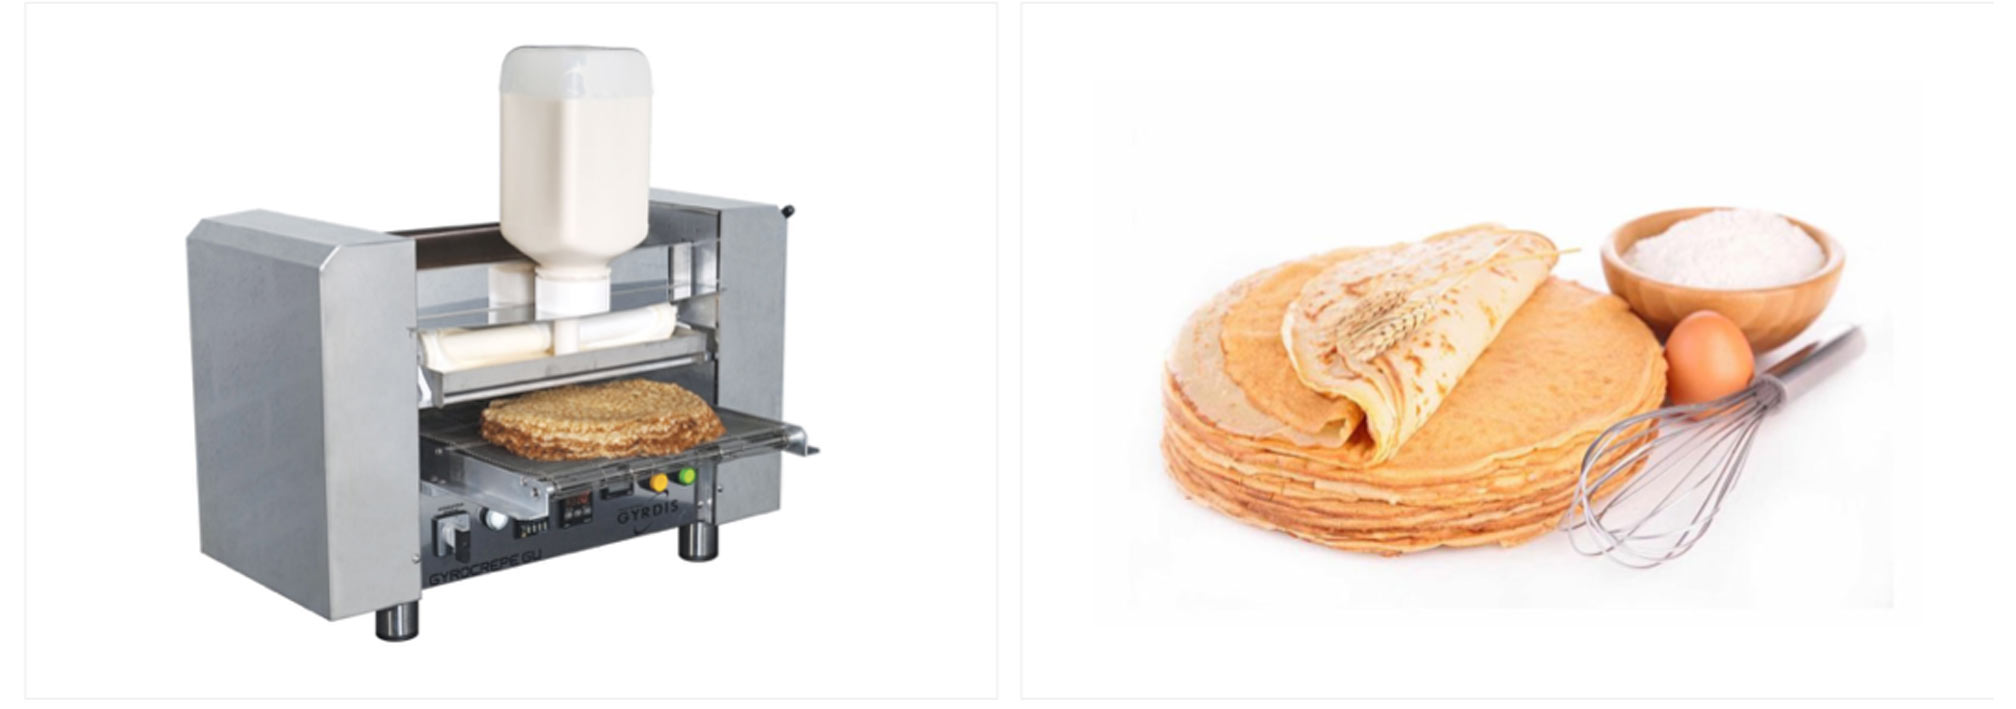 Gyrocrêpe machine (left) stack of prepared crêpes next to wire whisk, an egg and a bowl of flour — or maybe it is sugar